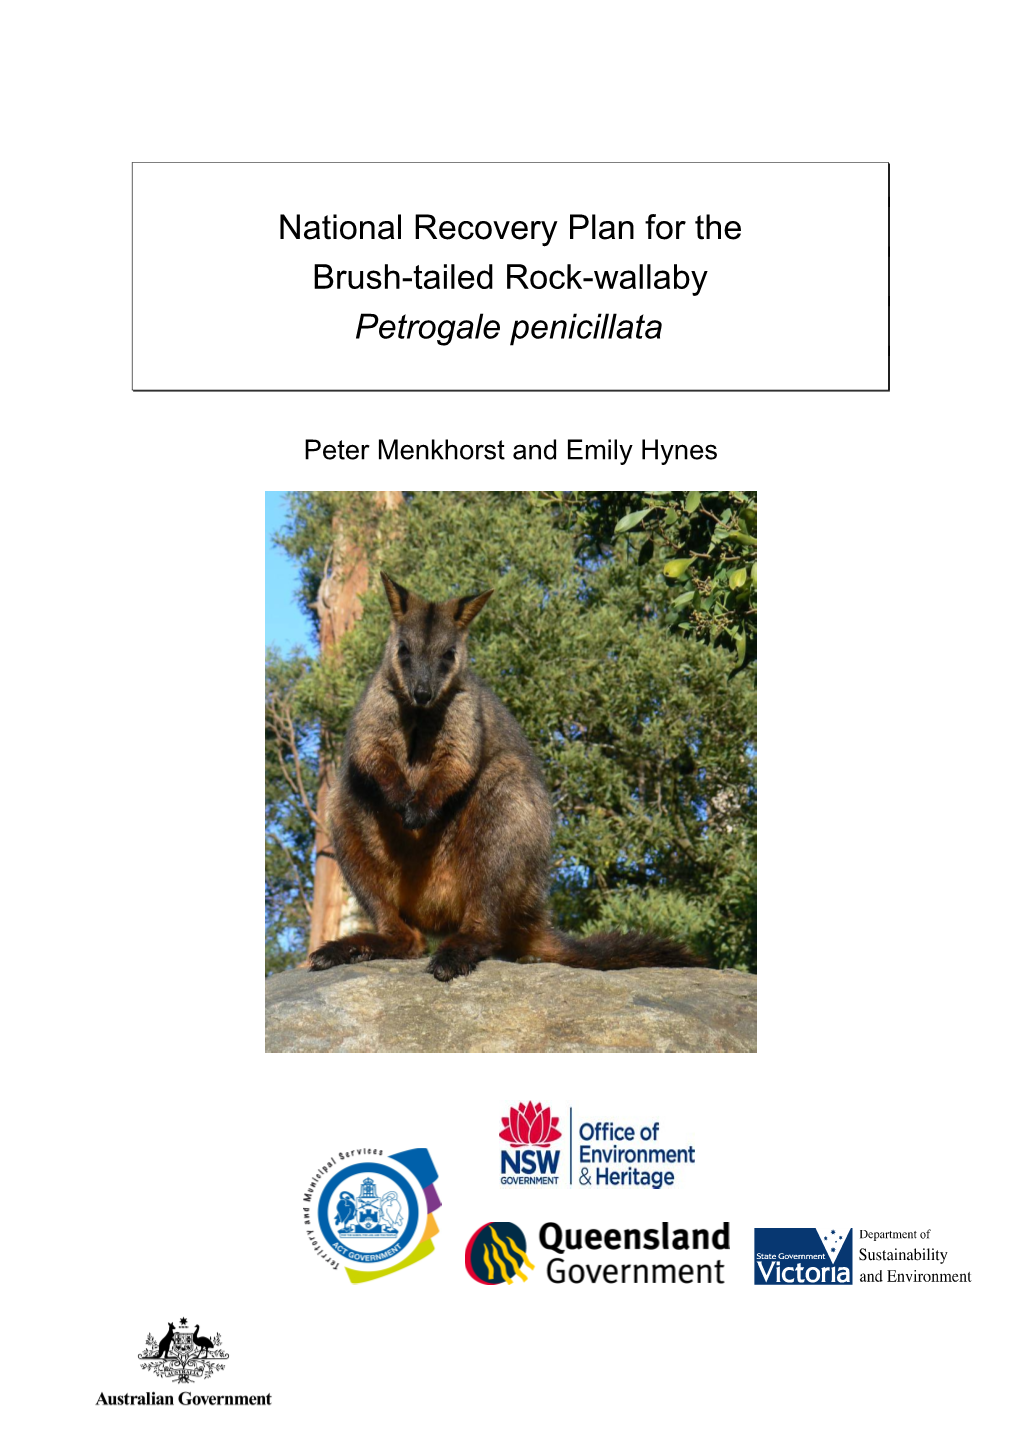 National Recovery Plan for the Brush-Tailed Rock-Wallaby Petrogale Penicillata